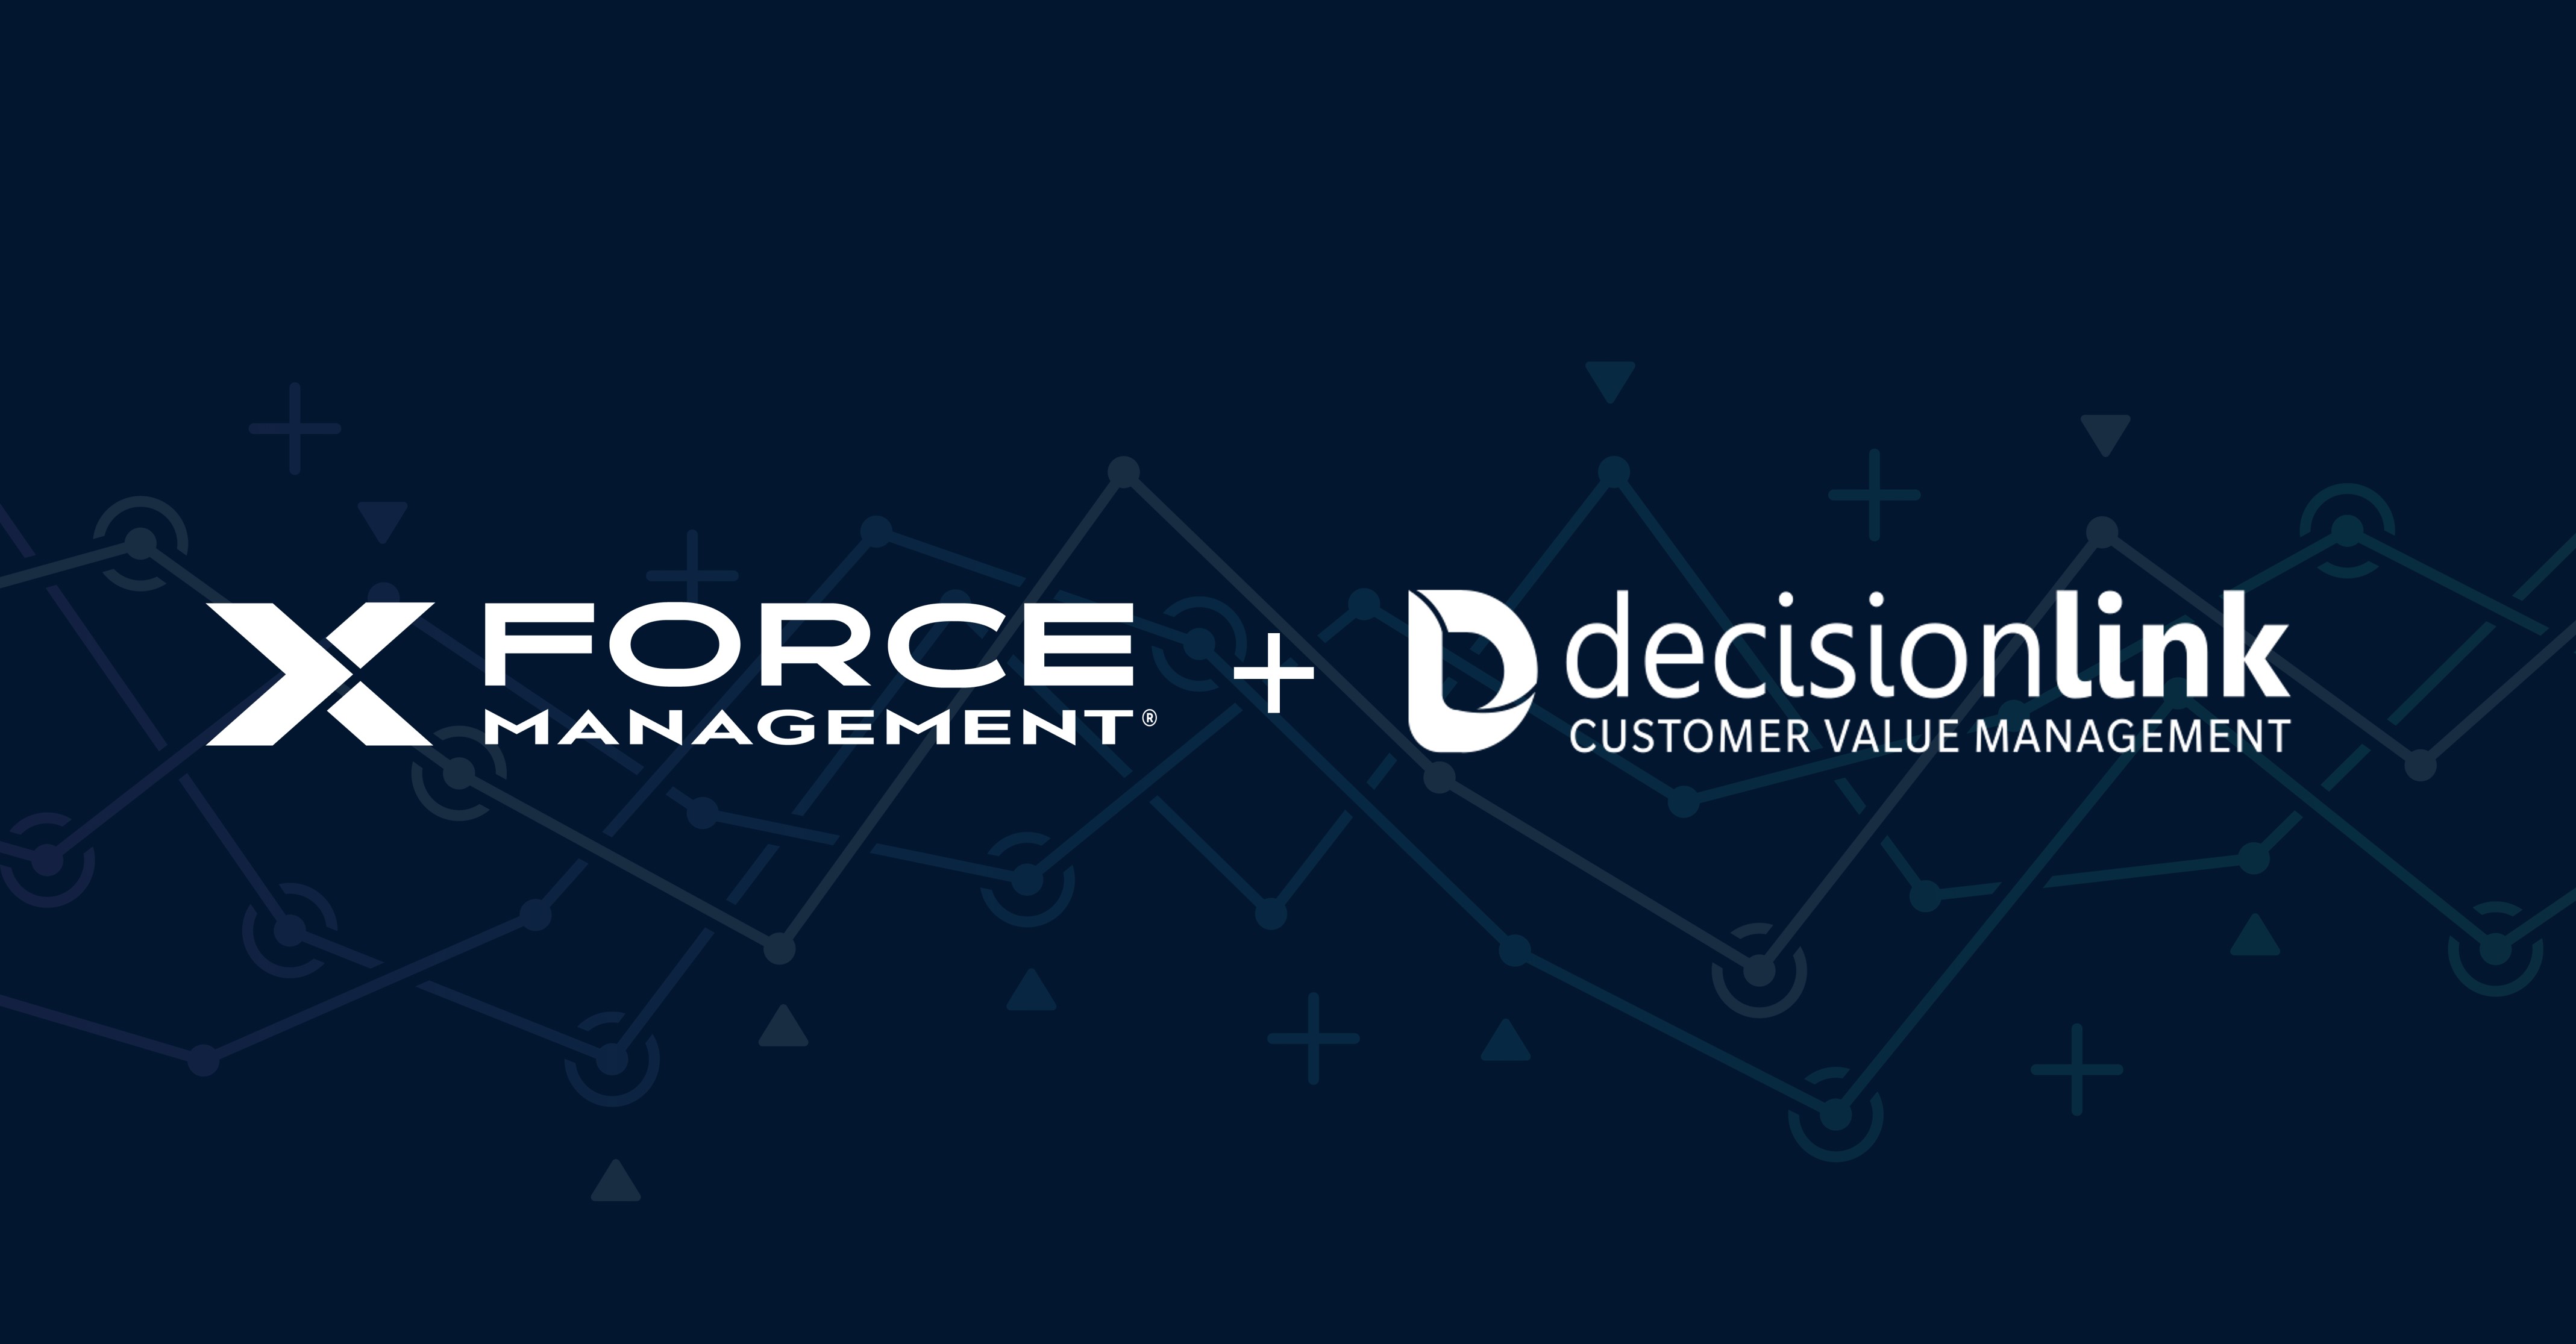 Force Management and DecisionLink Partner to Help Organizations Achieve Better Sales Results